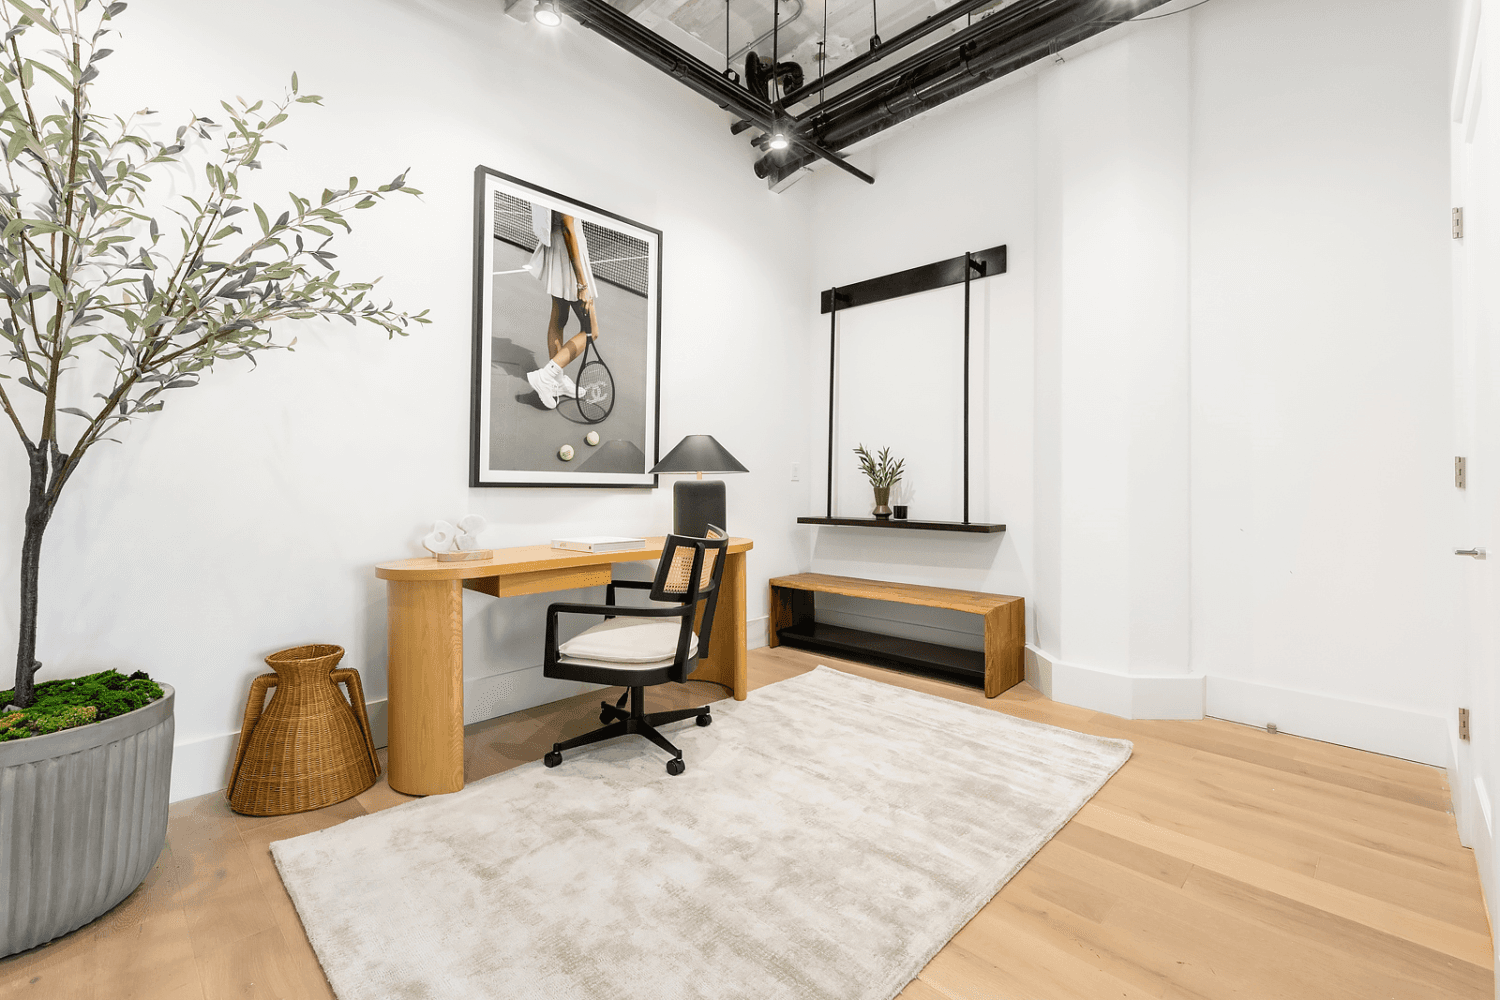 Experience a luxurious rental lifestyle in one of the city's most desirable waterfront neighborhoods in this impeccably crafted 3 bedroom, 2 bathroom corner apartment at Williamsburg Lofts.